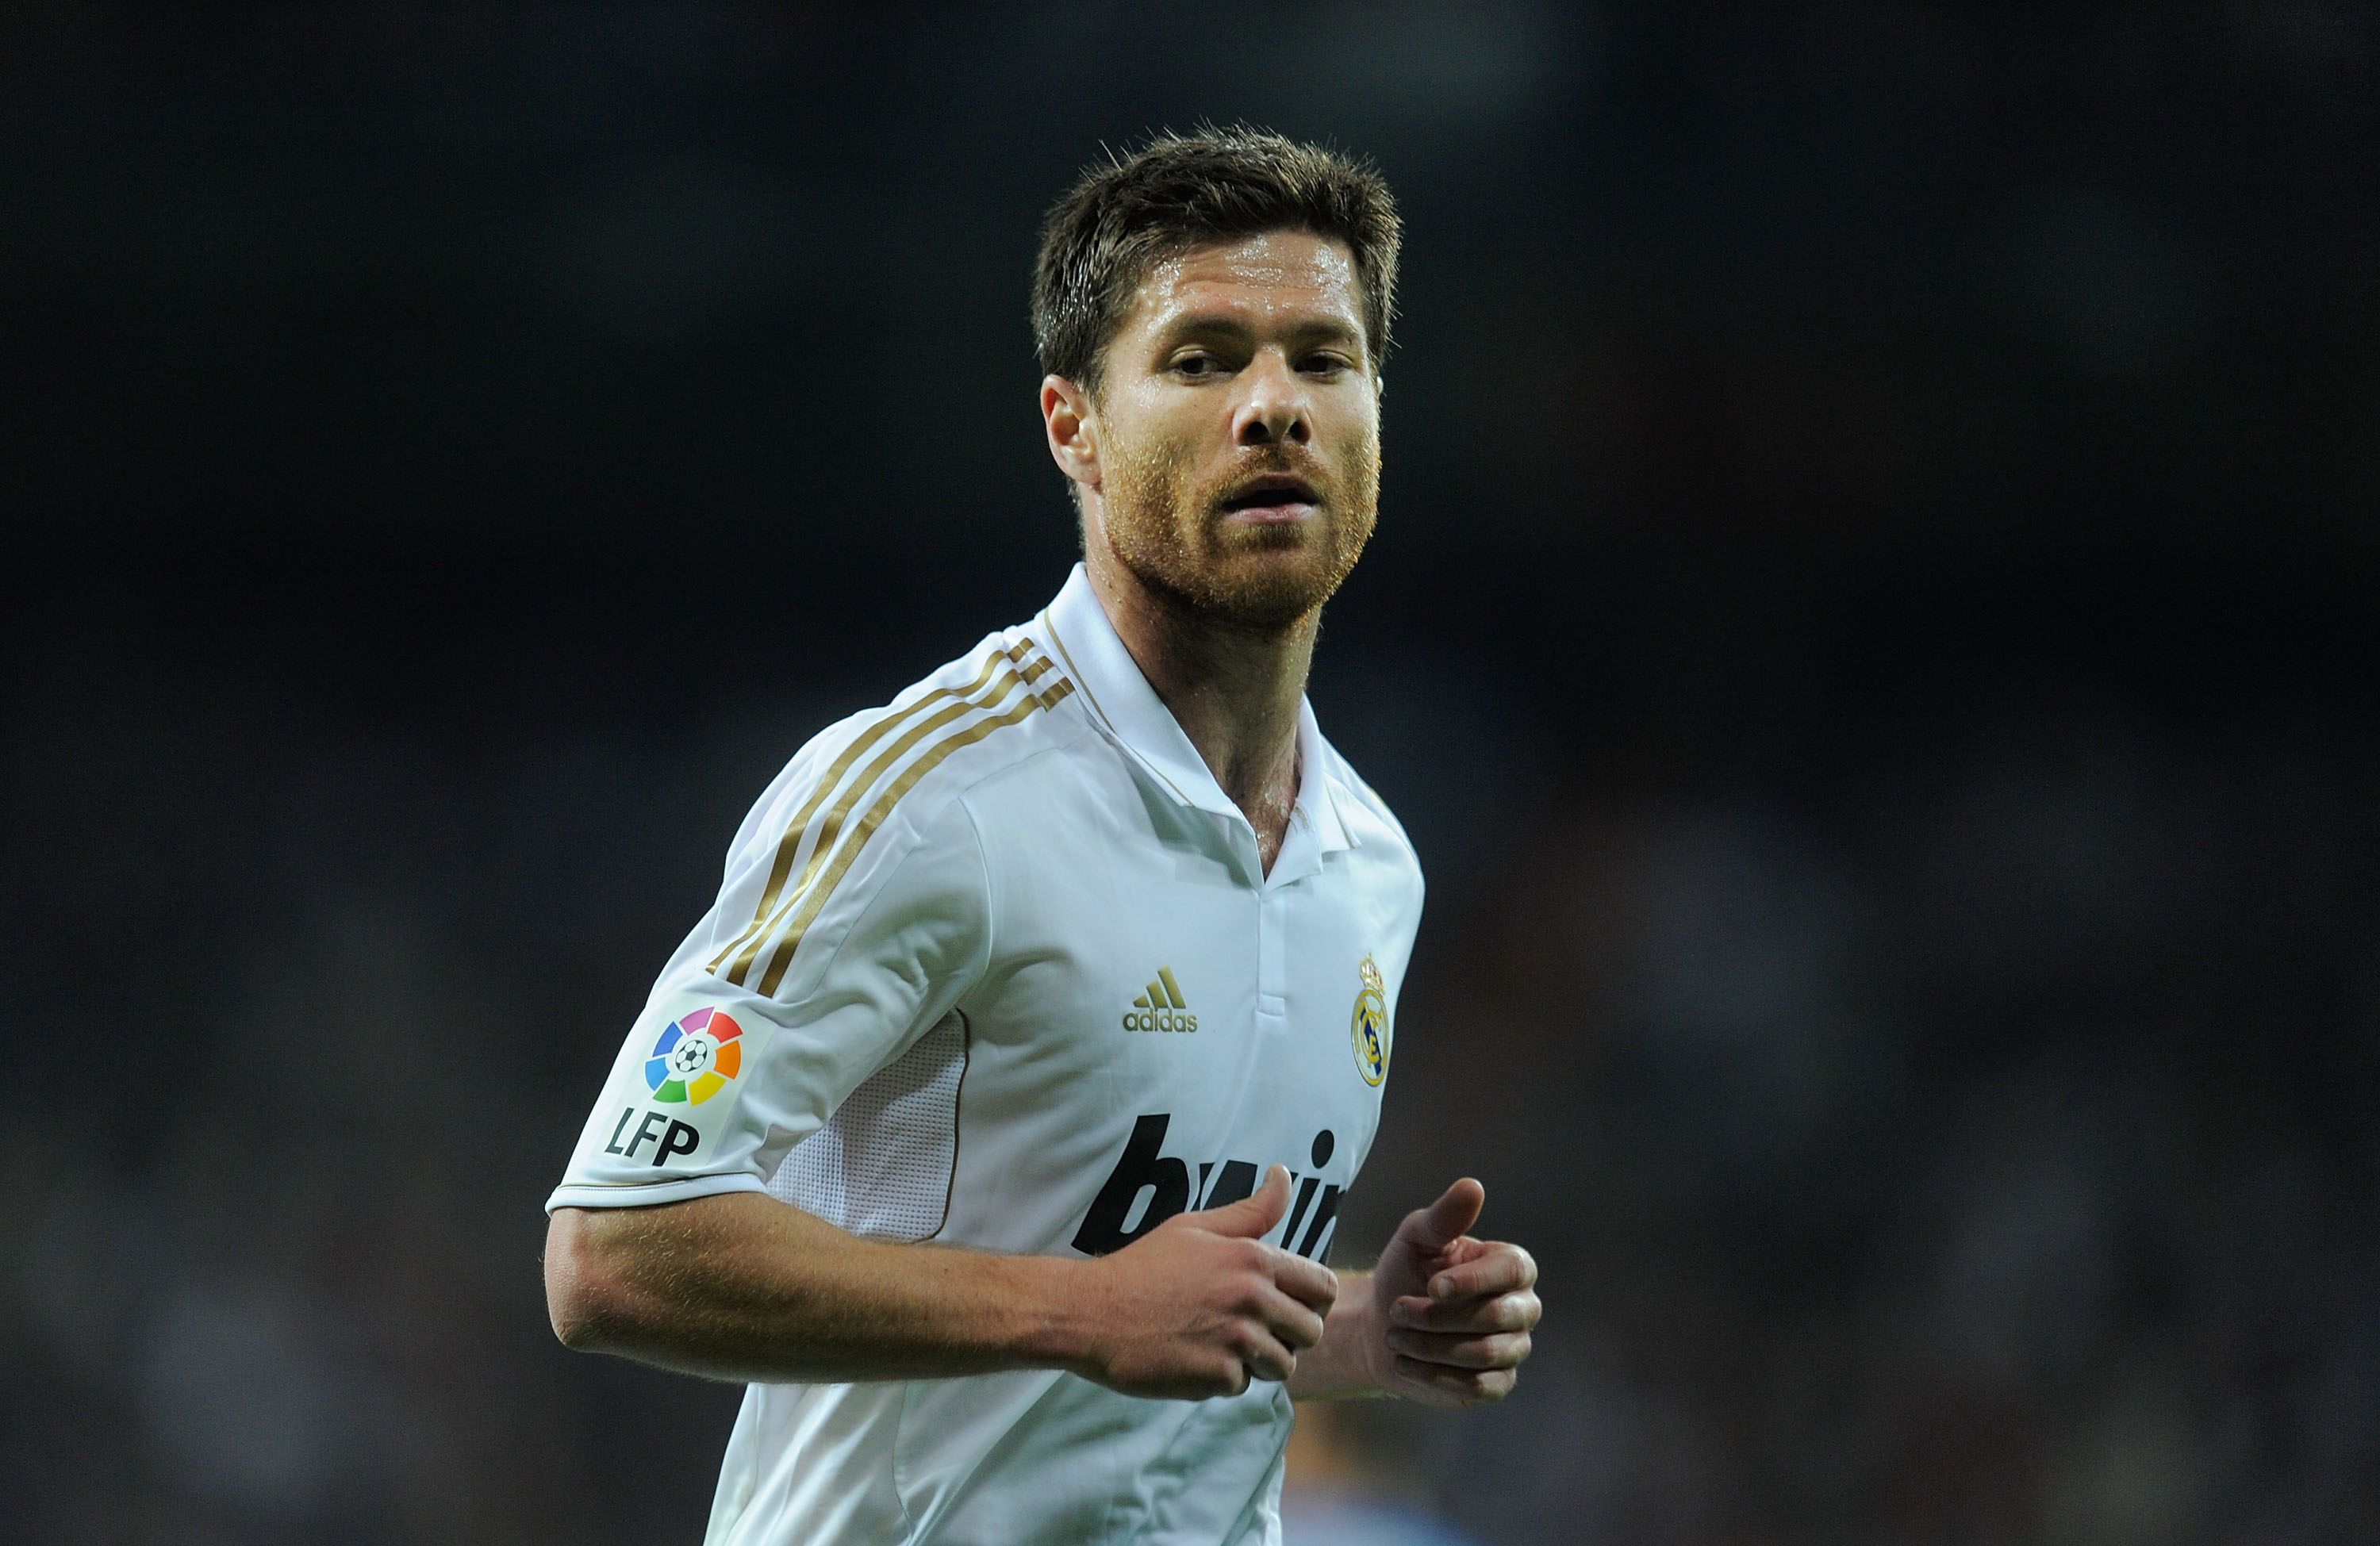 Xabi Alonso was a player who won it all. How will he do as a coach? | CNN